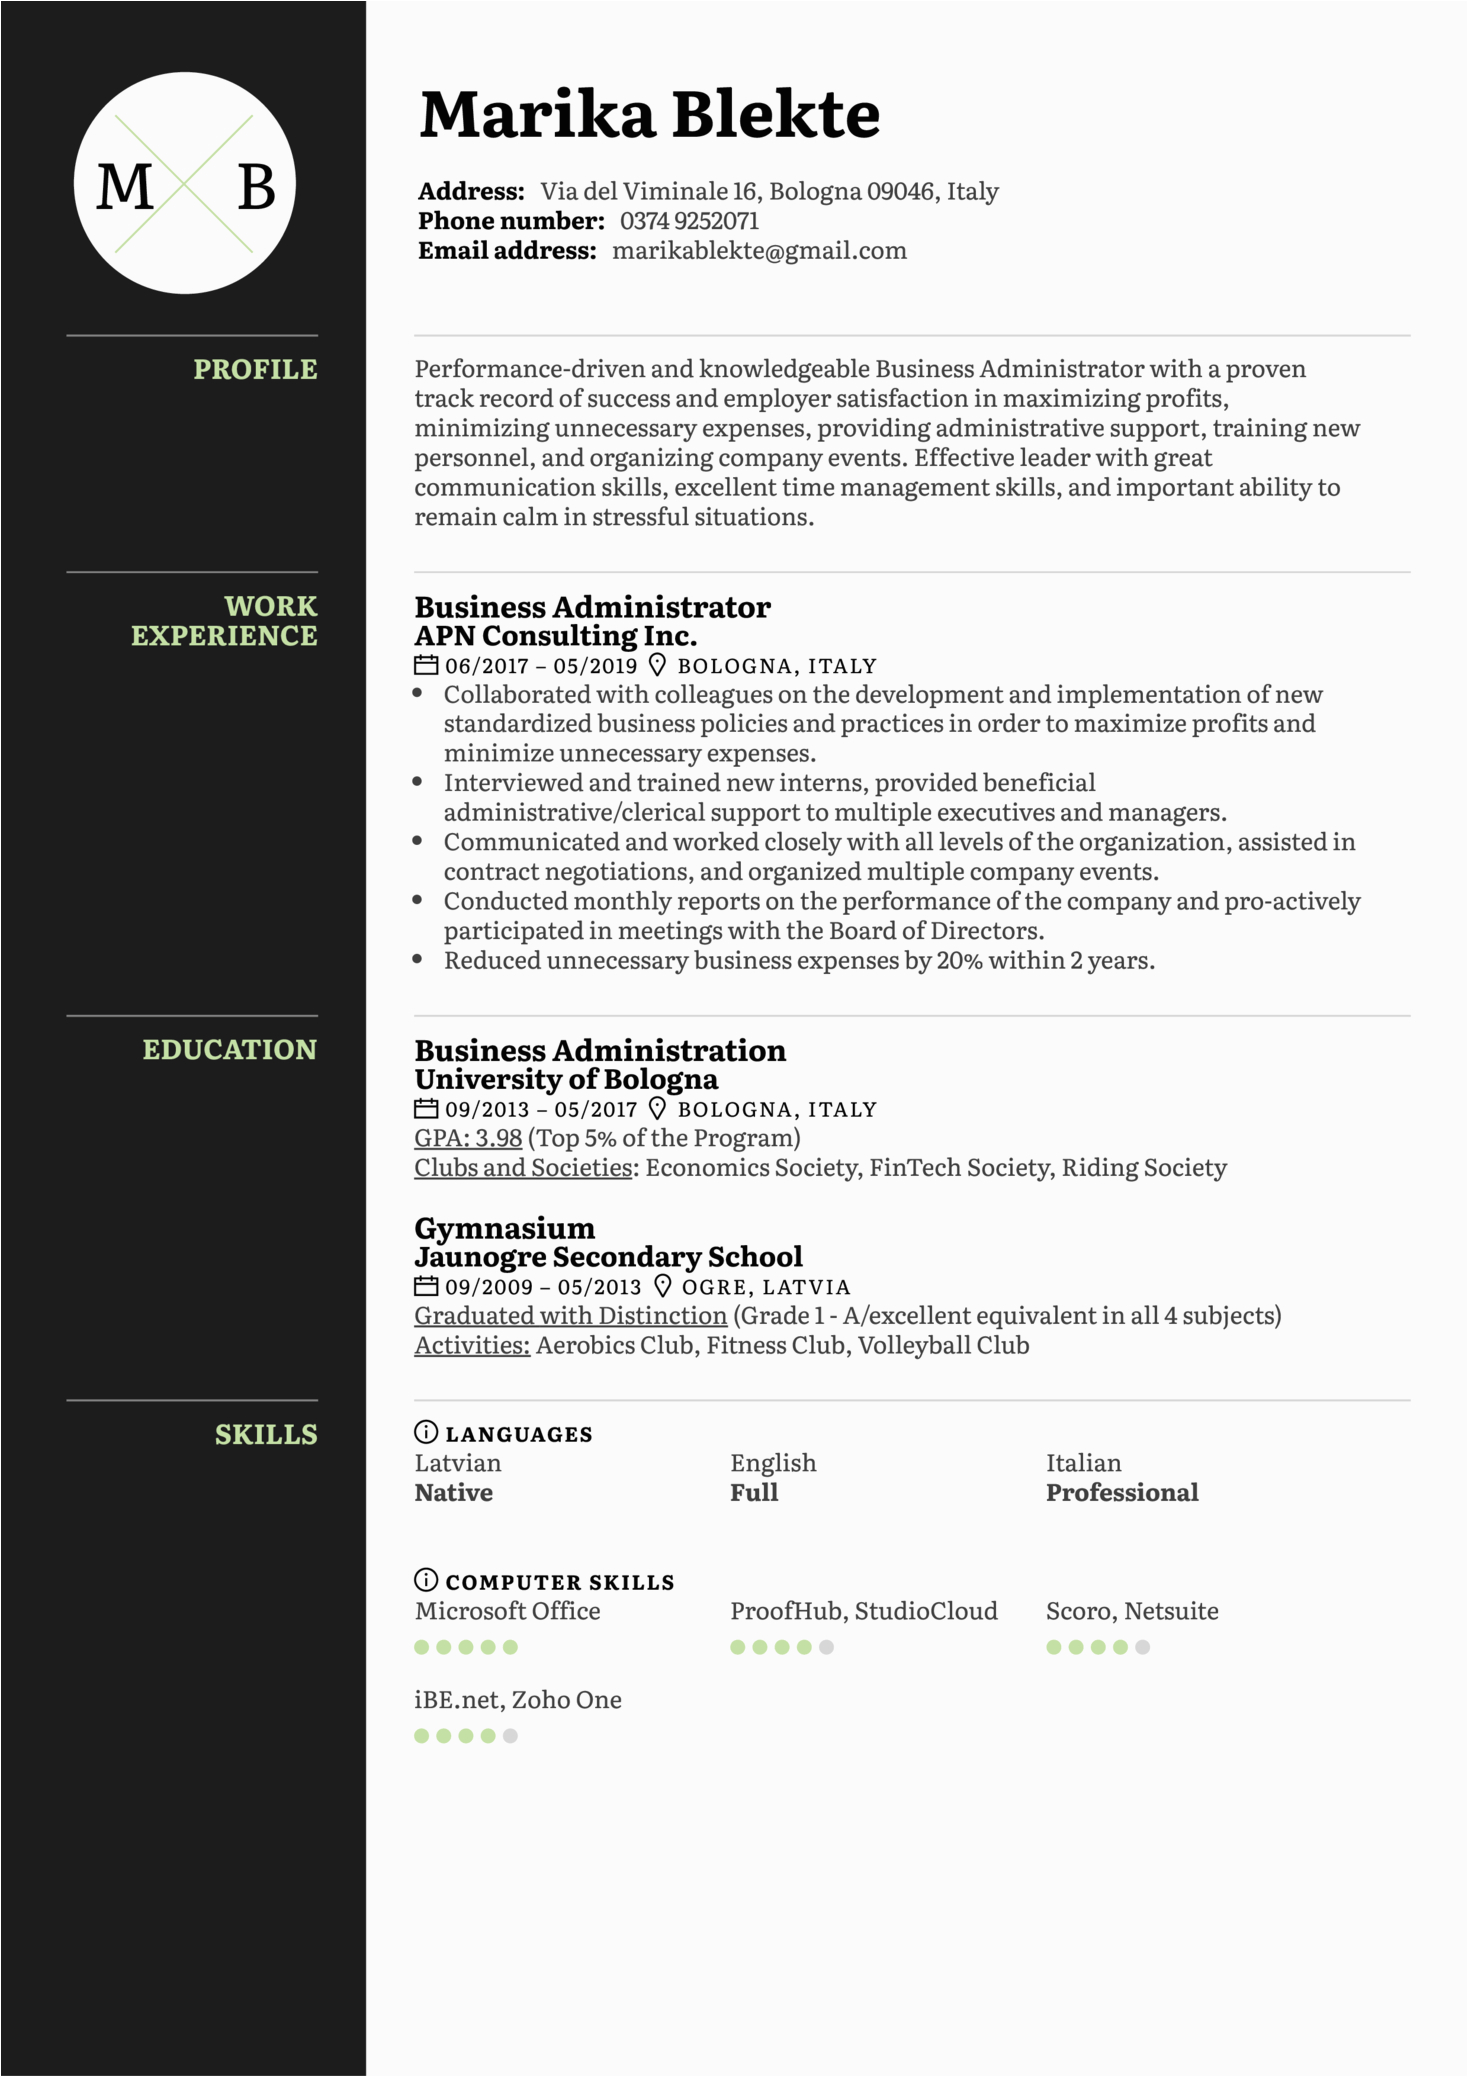 Sample Resume for Business Administration Student Business Administrator Resume Sample